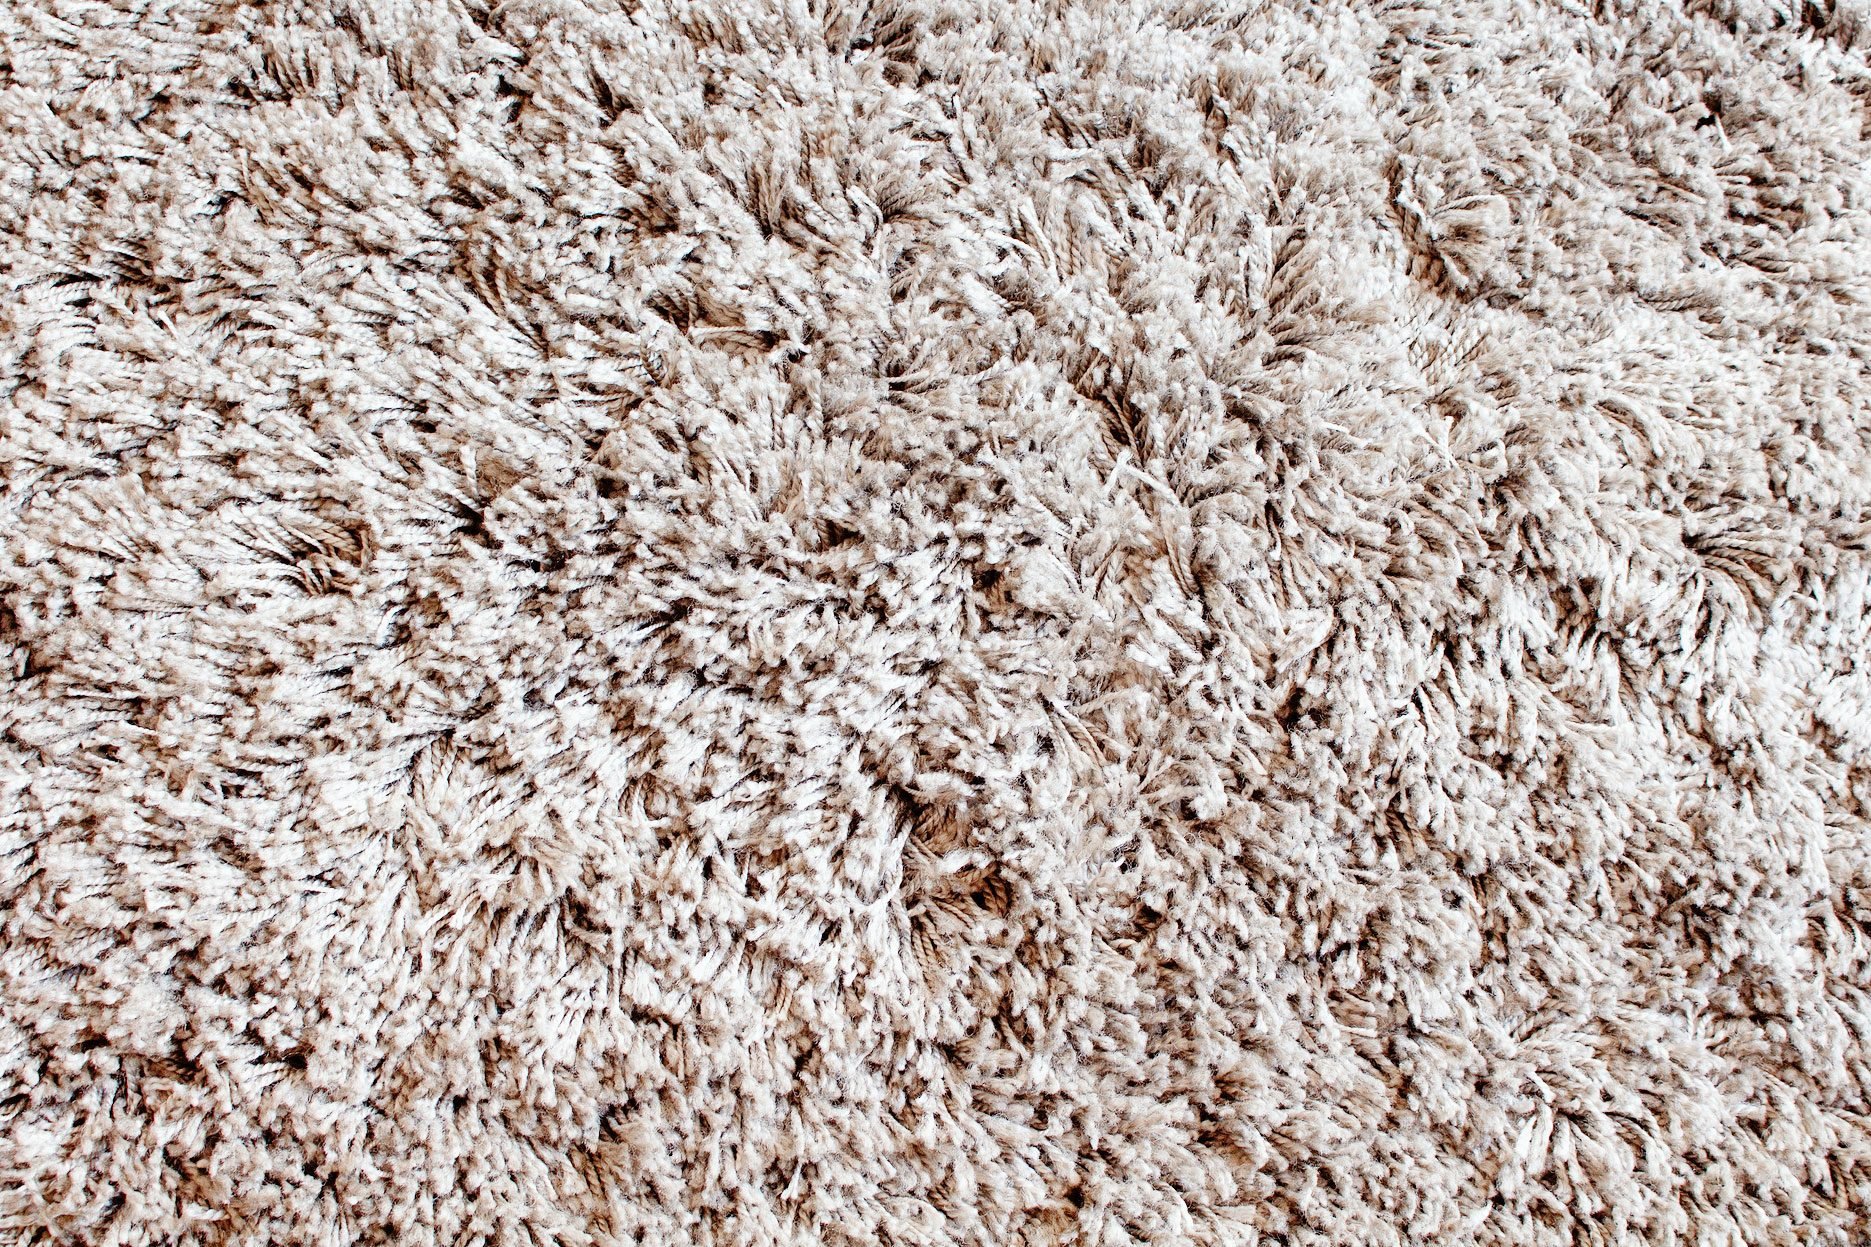 How to Clean a Carpet With and Without a Machine